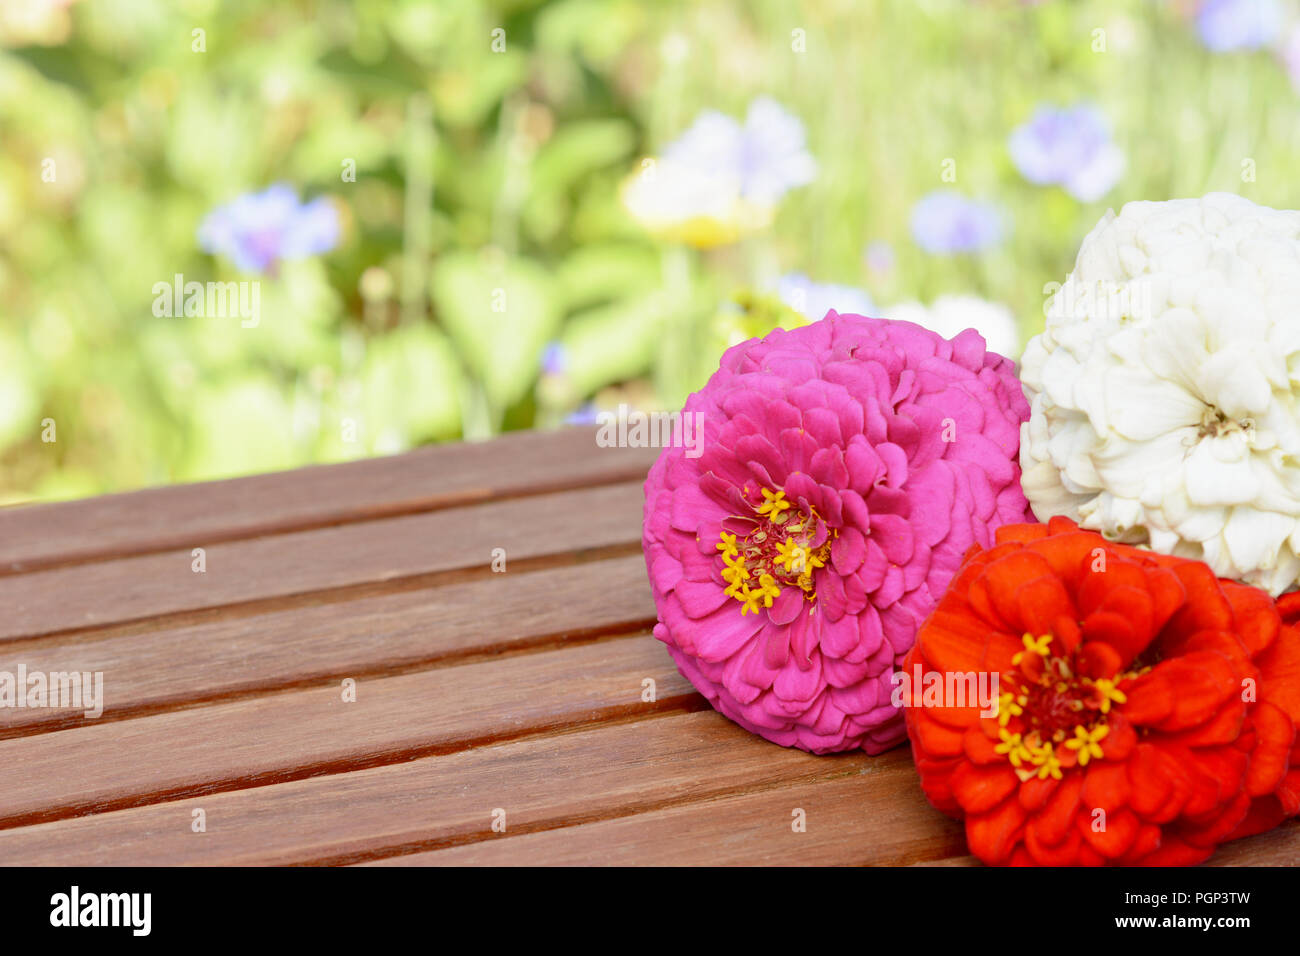 Pink, white and red zinnia flowers in close-up with copy space on a wooden table, outside in a summer garden Stock Photo